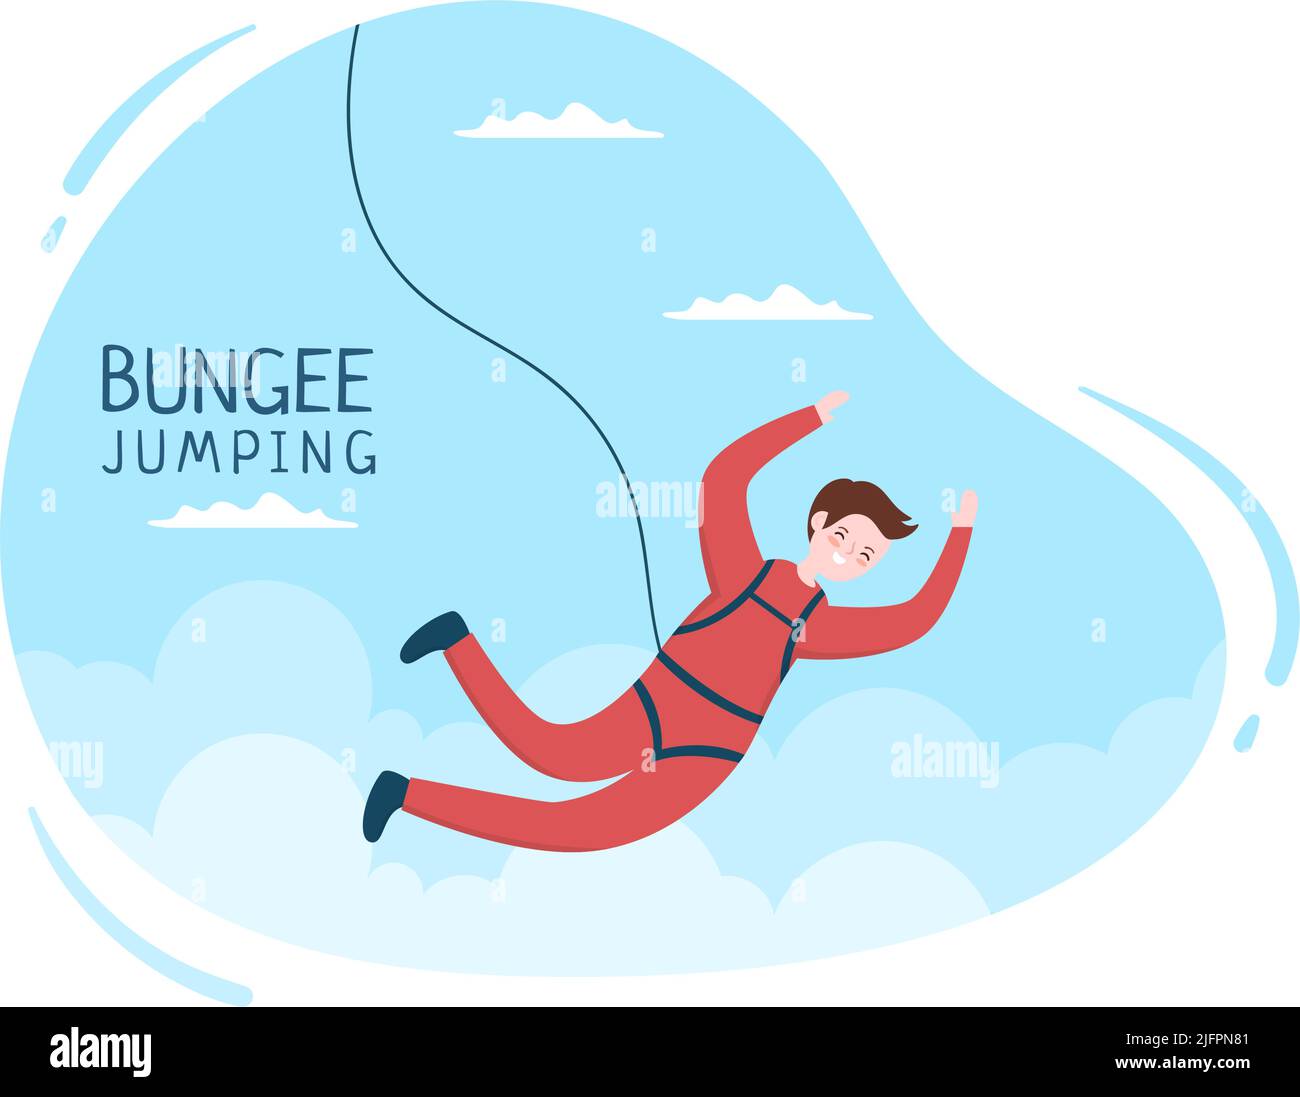 Bungee Jumping of People Tied with Elastic Rope Falling Down After Jump  From a Height in Flat Cartoon Extreme Sport Vector Illustration 9248969  Vector Art at Vecteezy